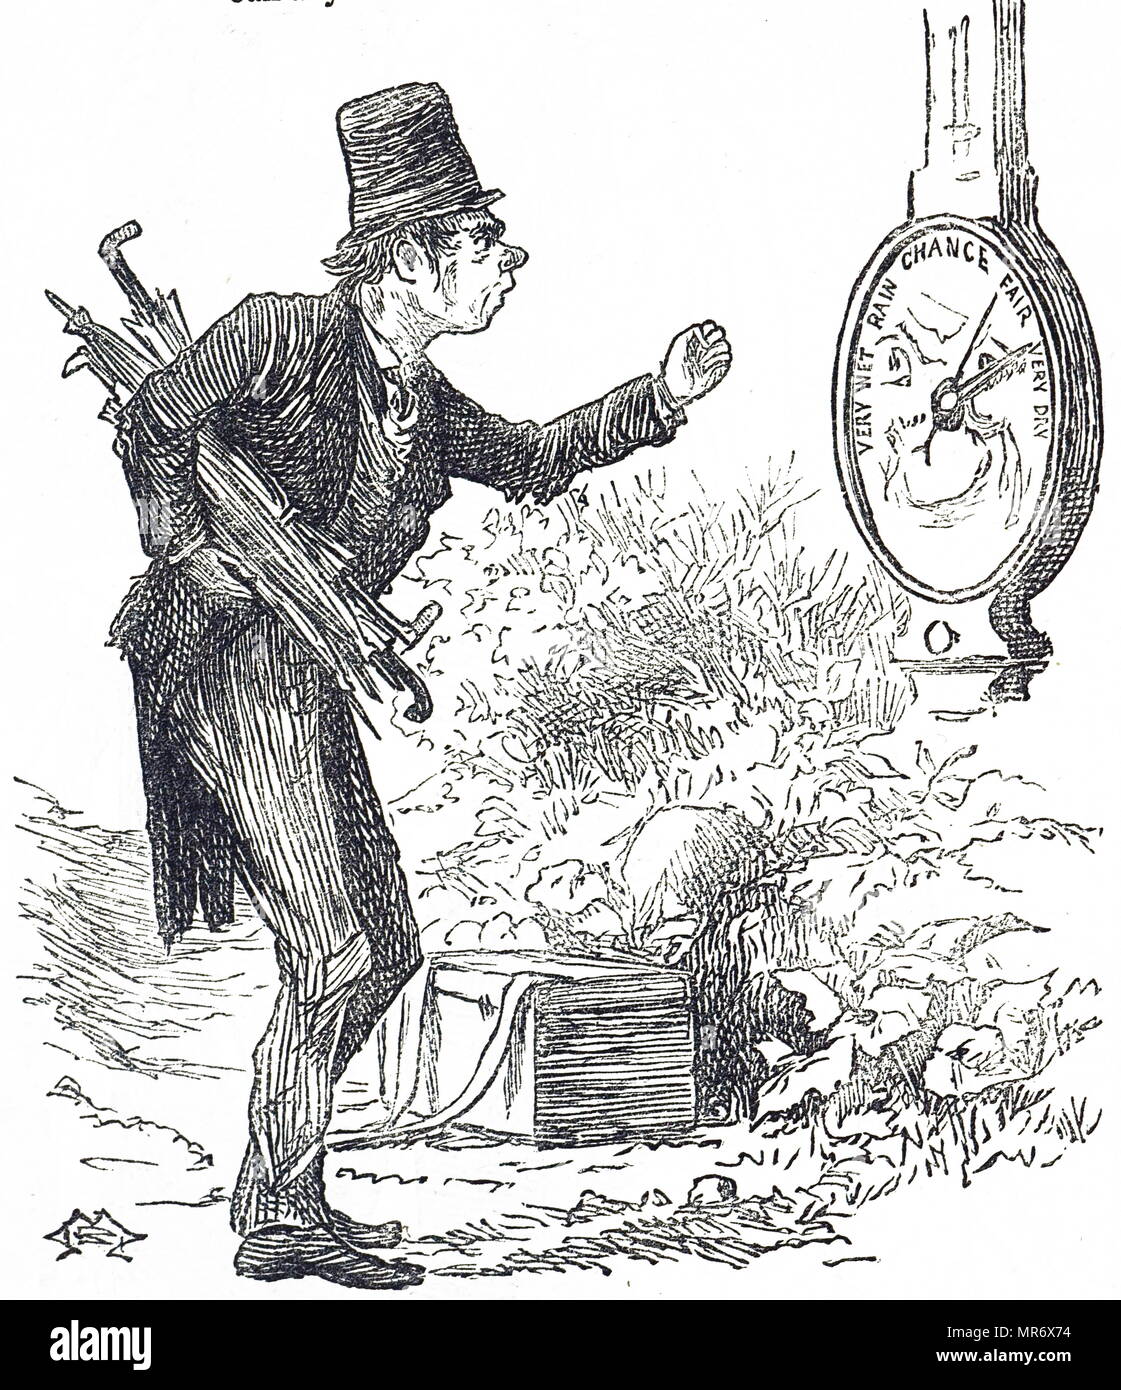 Cartoon commenting on unreliable weather forecasts made by barometers. Dated 19th century Stock Photo